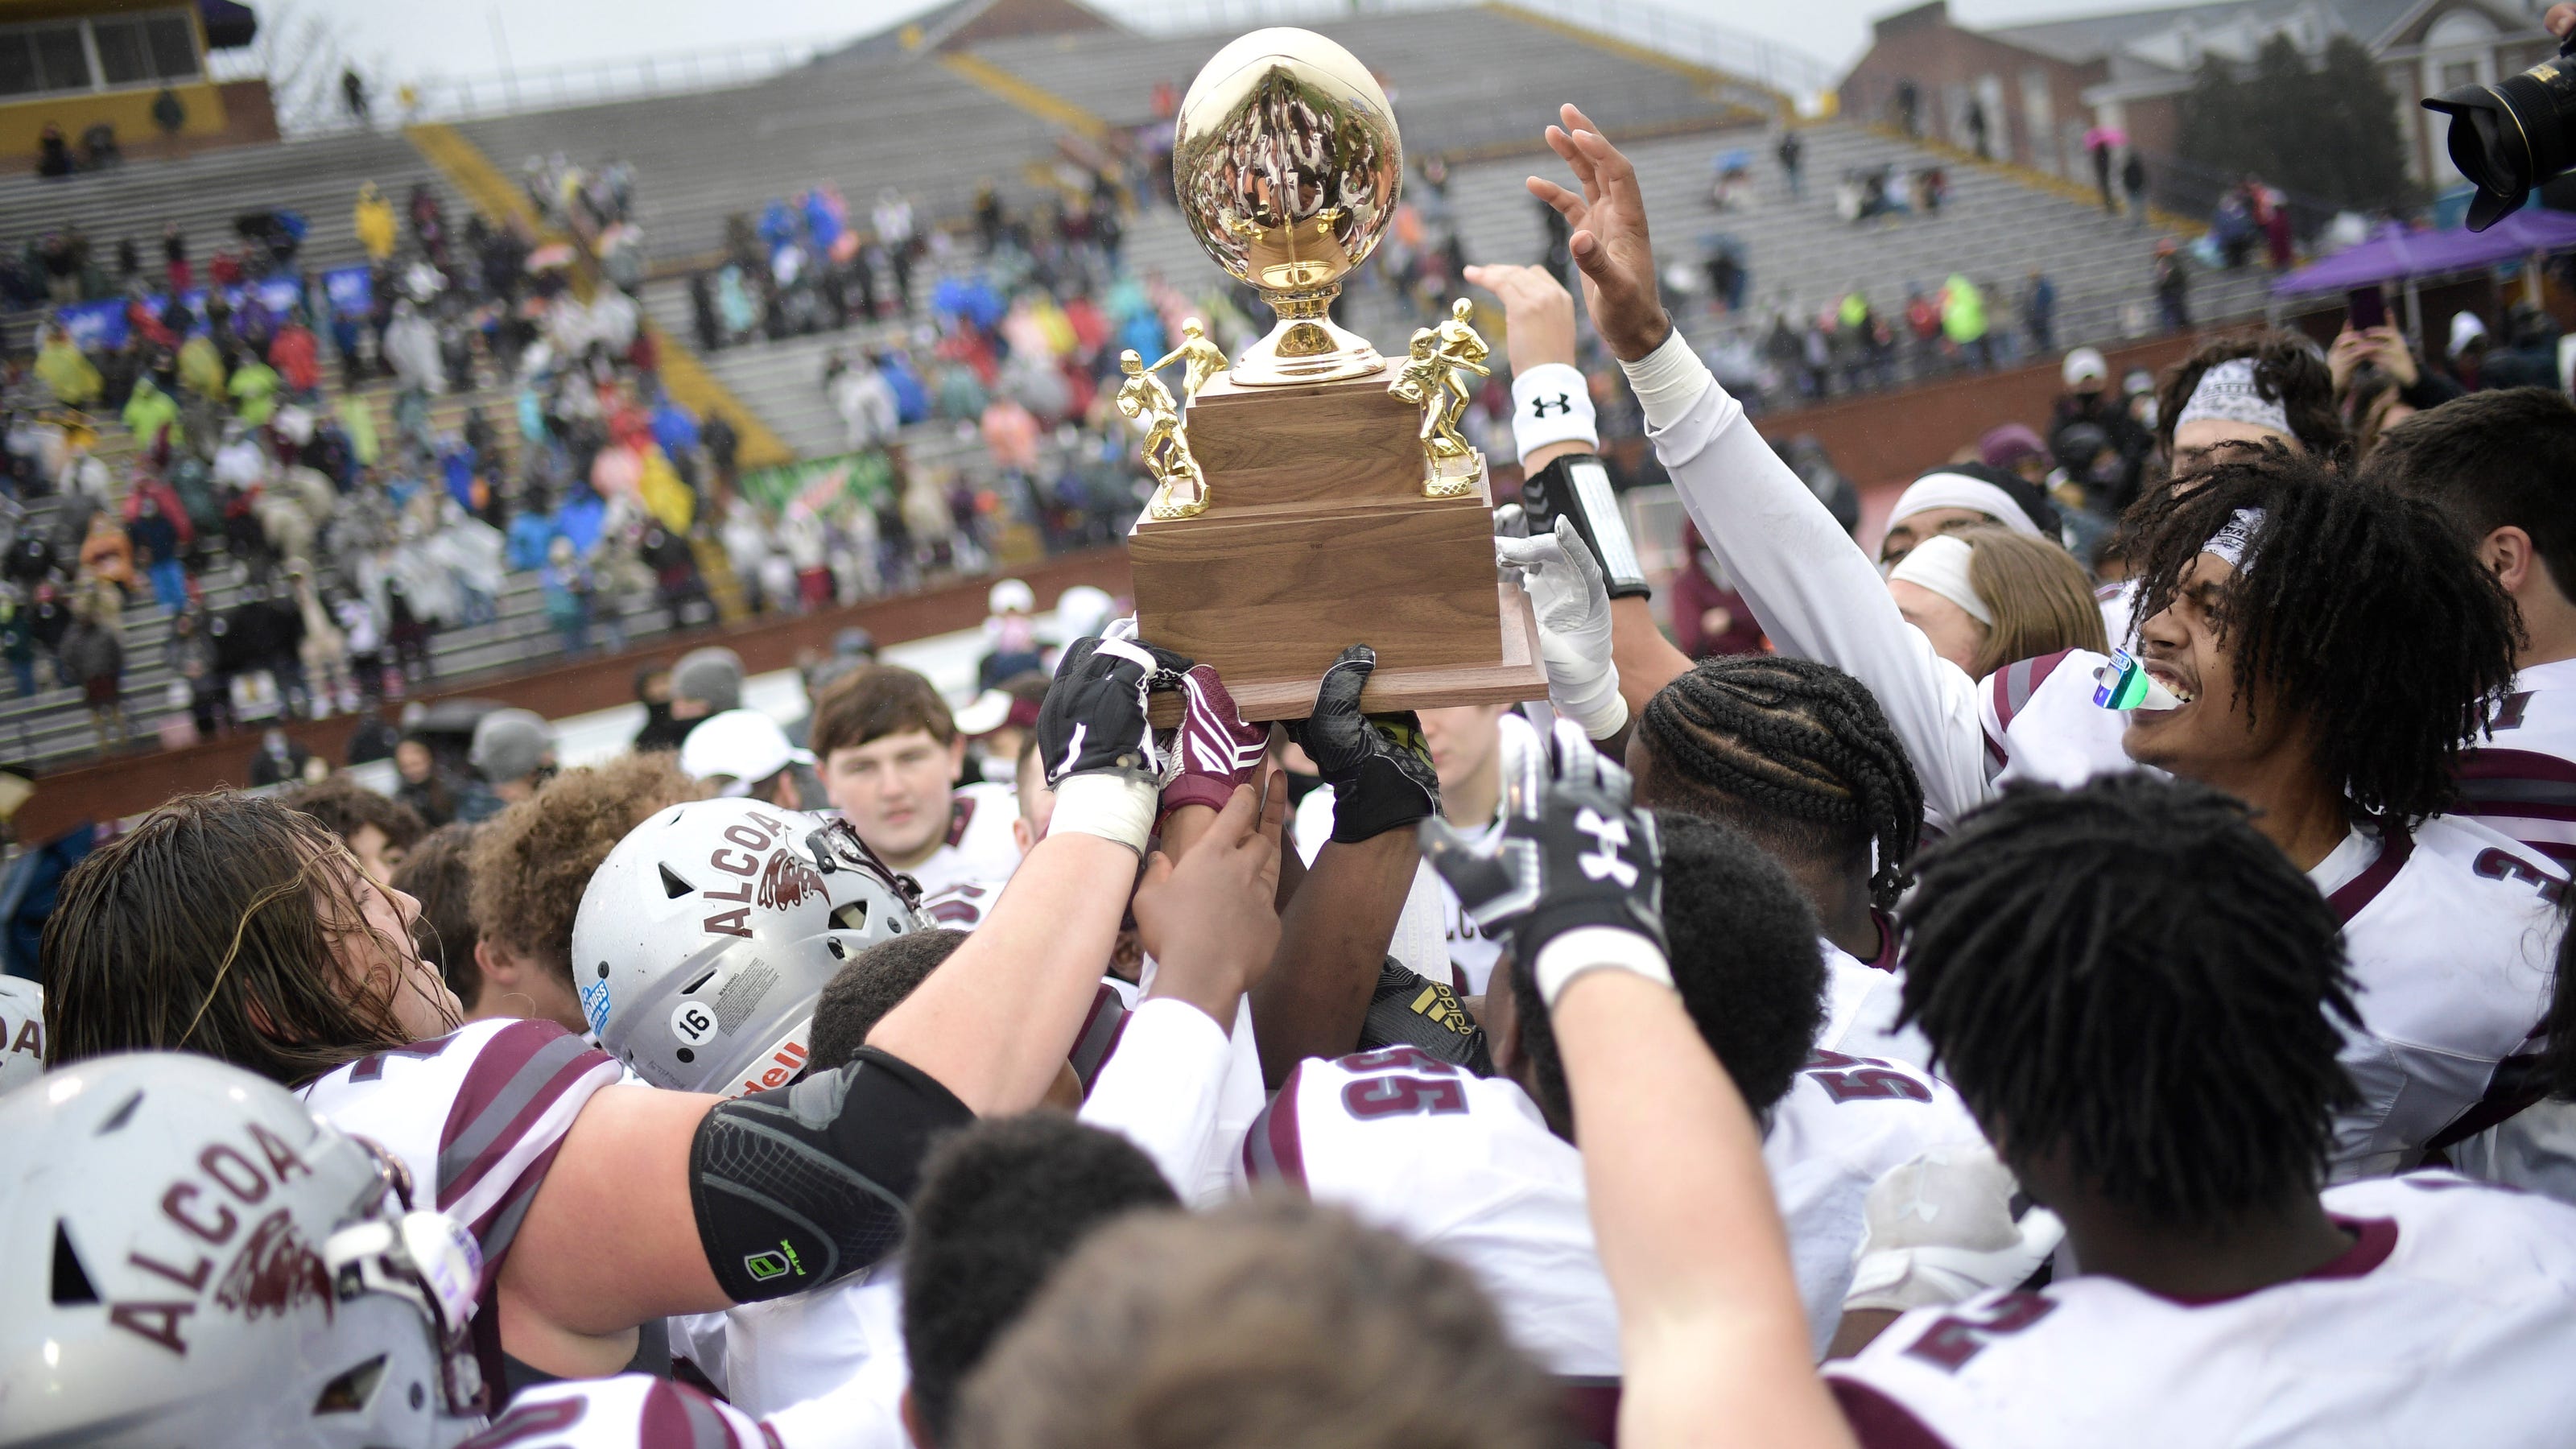 TSSAA football: What to know about Alcoa, Powell in state championship